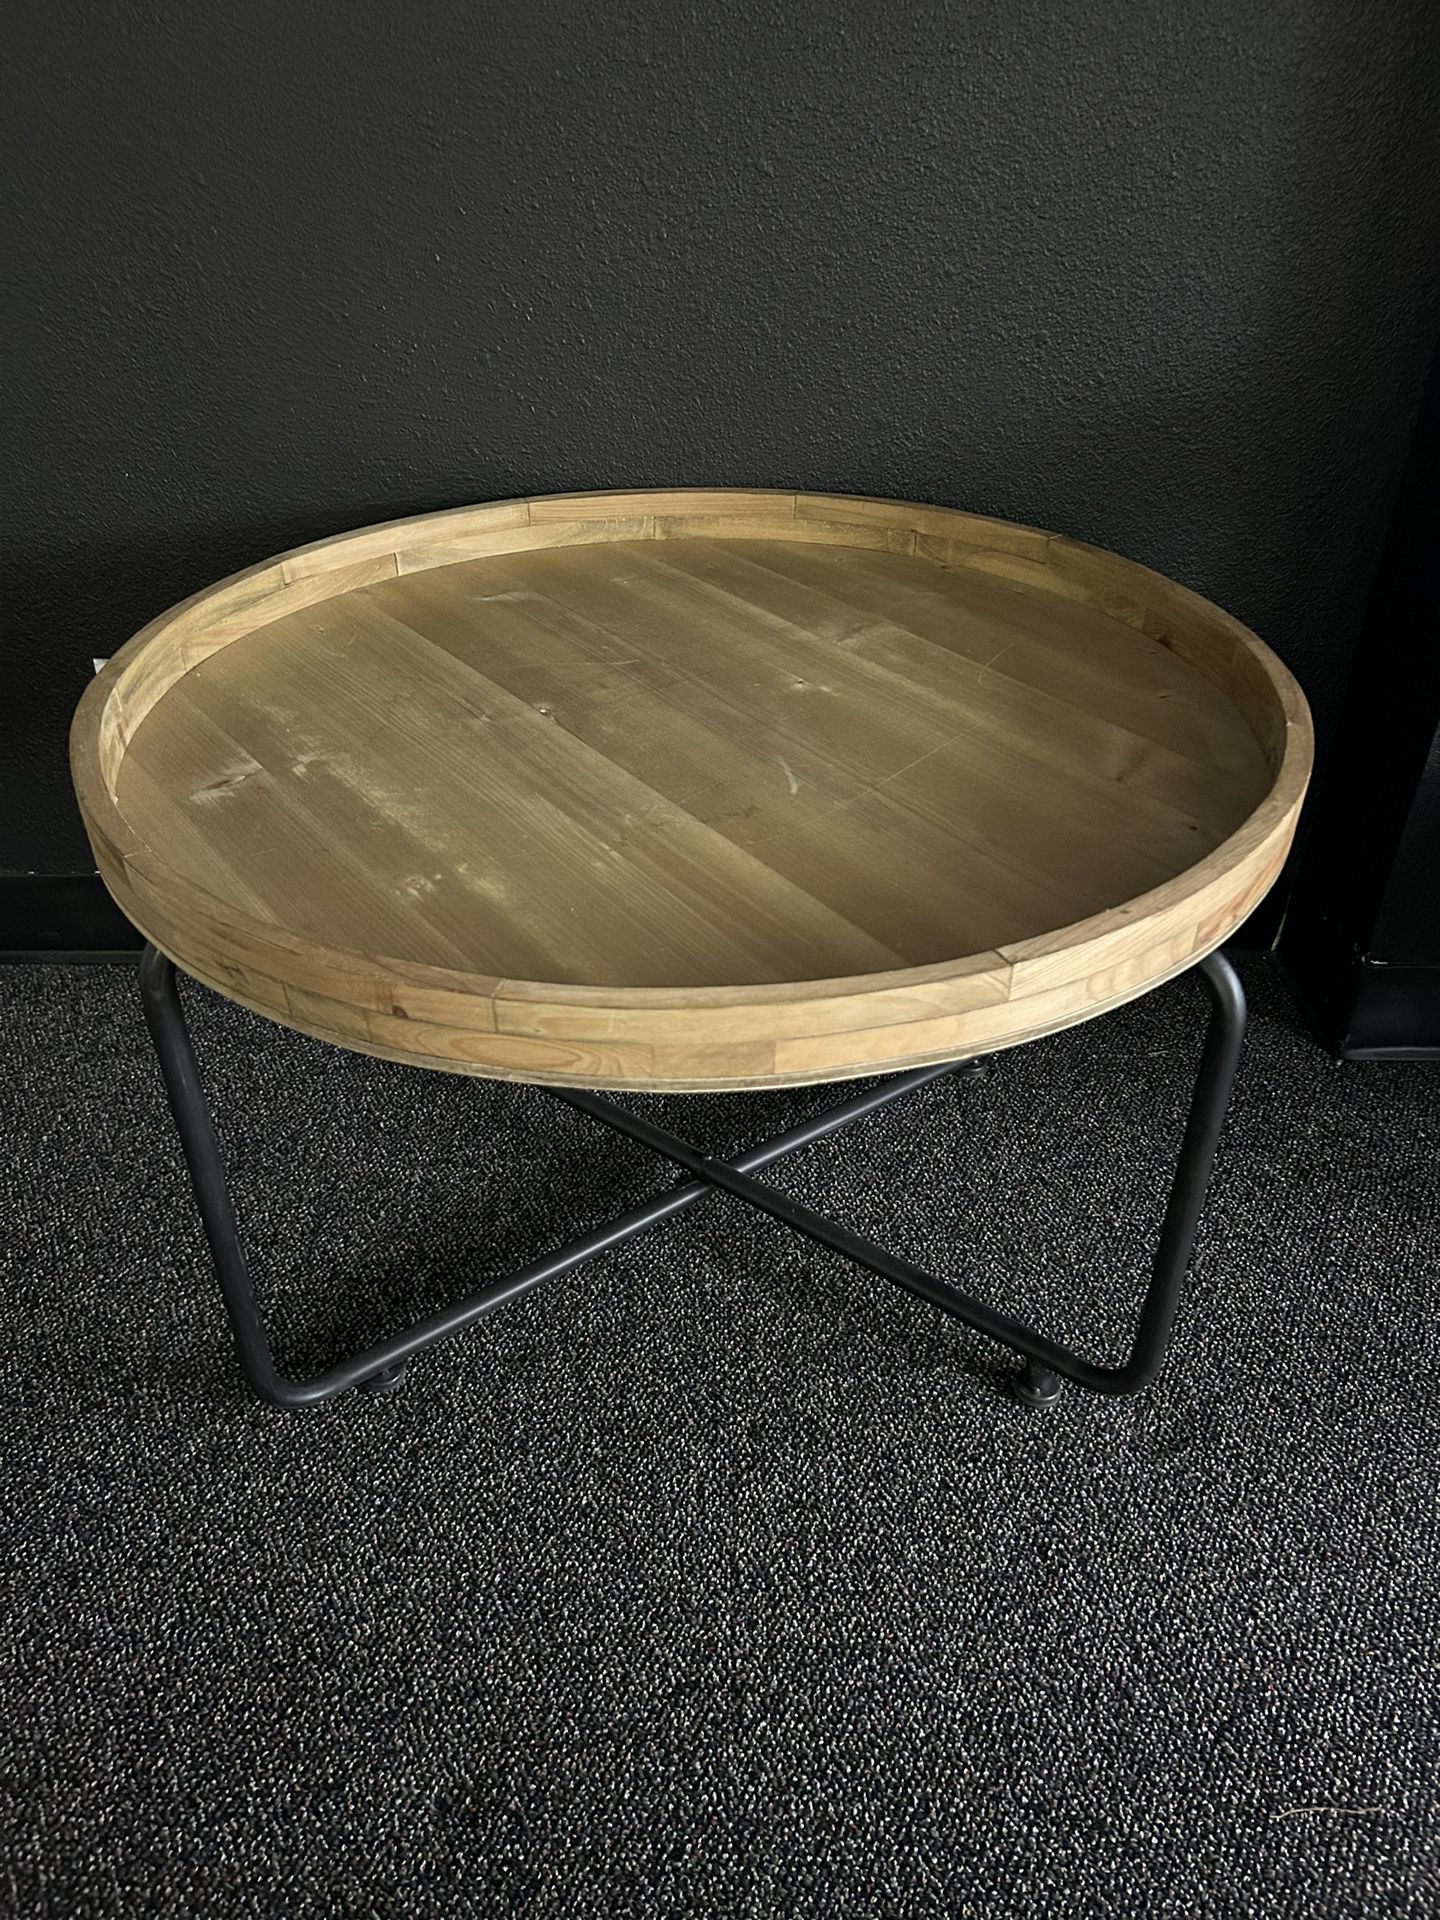 Wooden Round Portable Coffee Table 